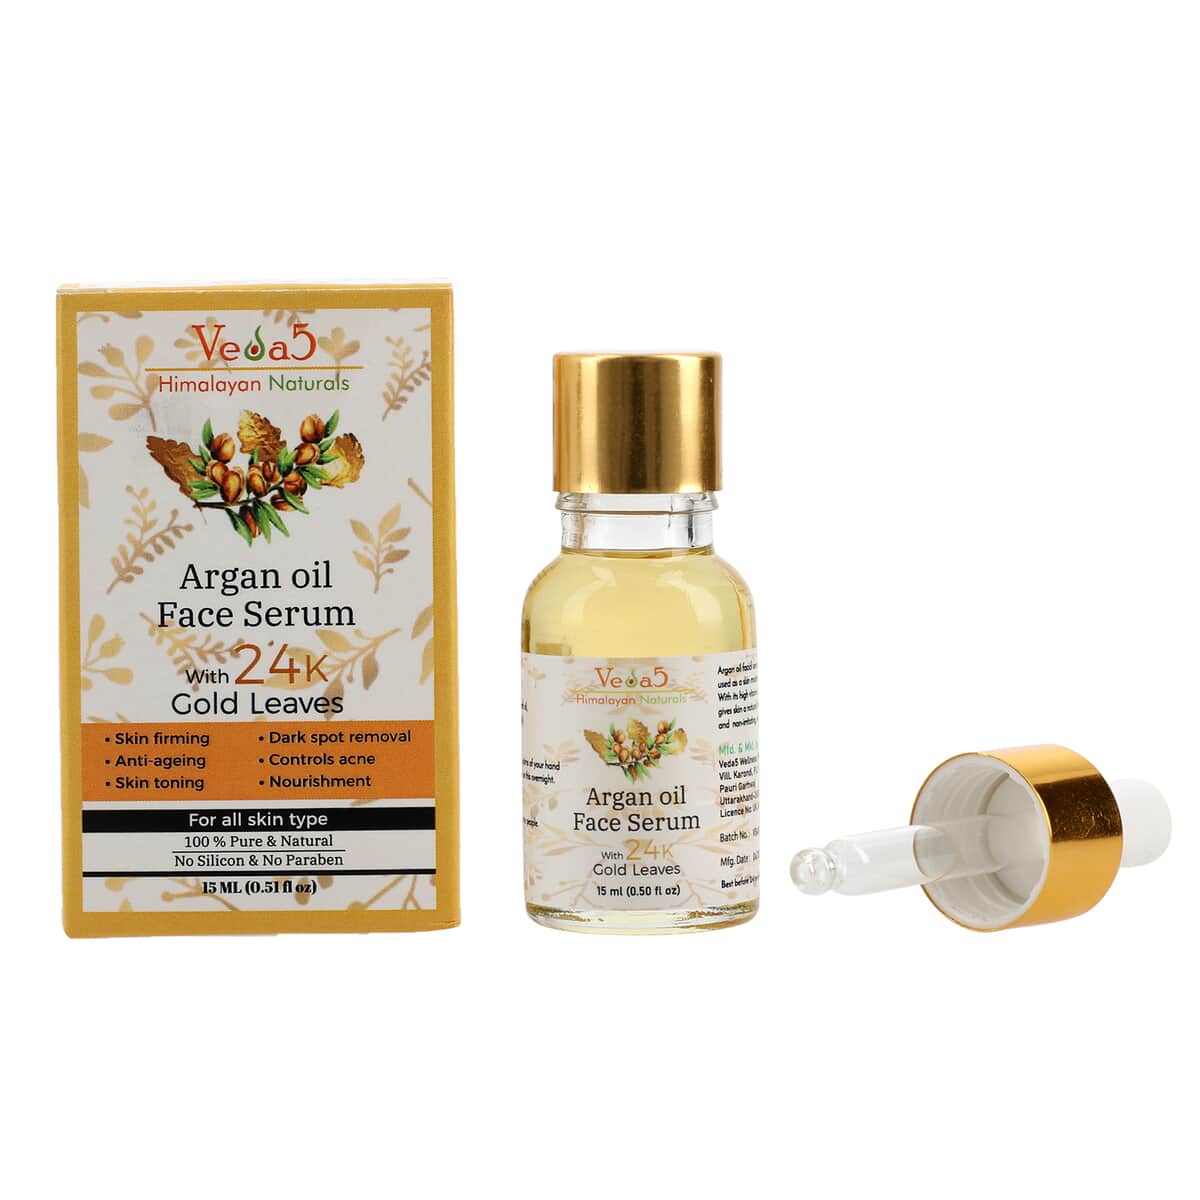 Veda5 Himalayan Naturals Argan Oil Face Serum with 24K Gold Leaves 15ml image number 0